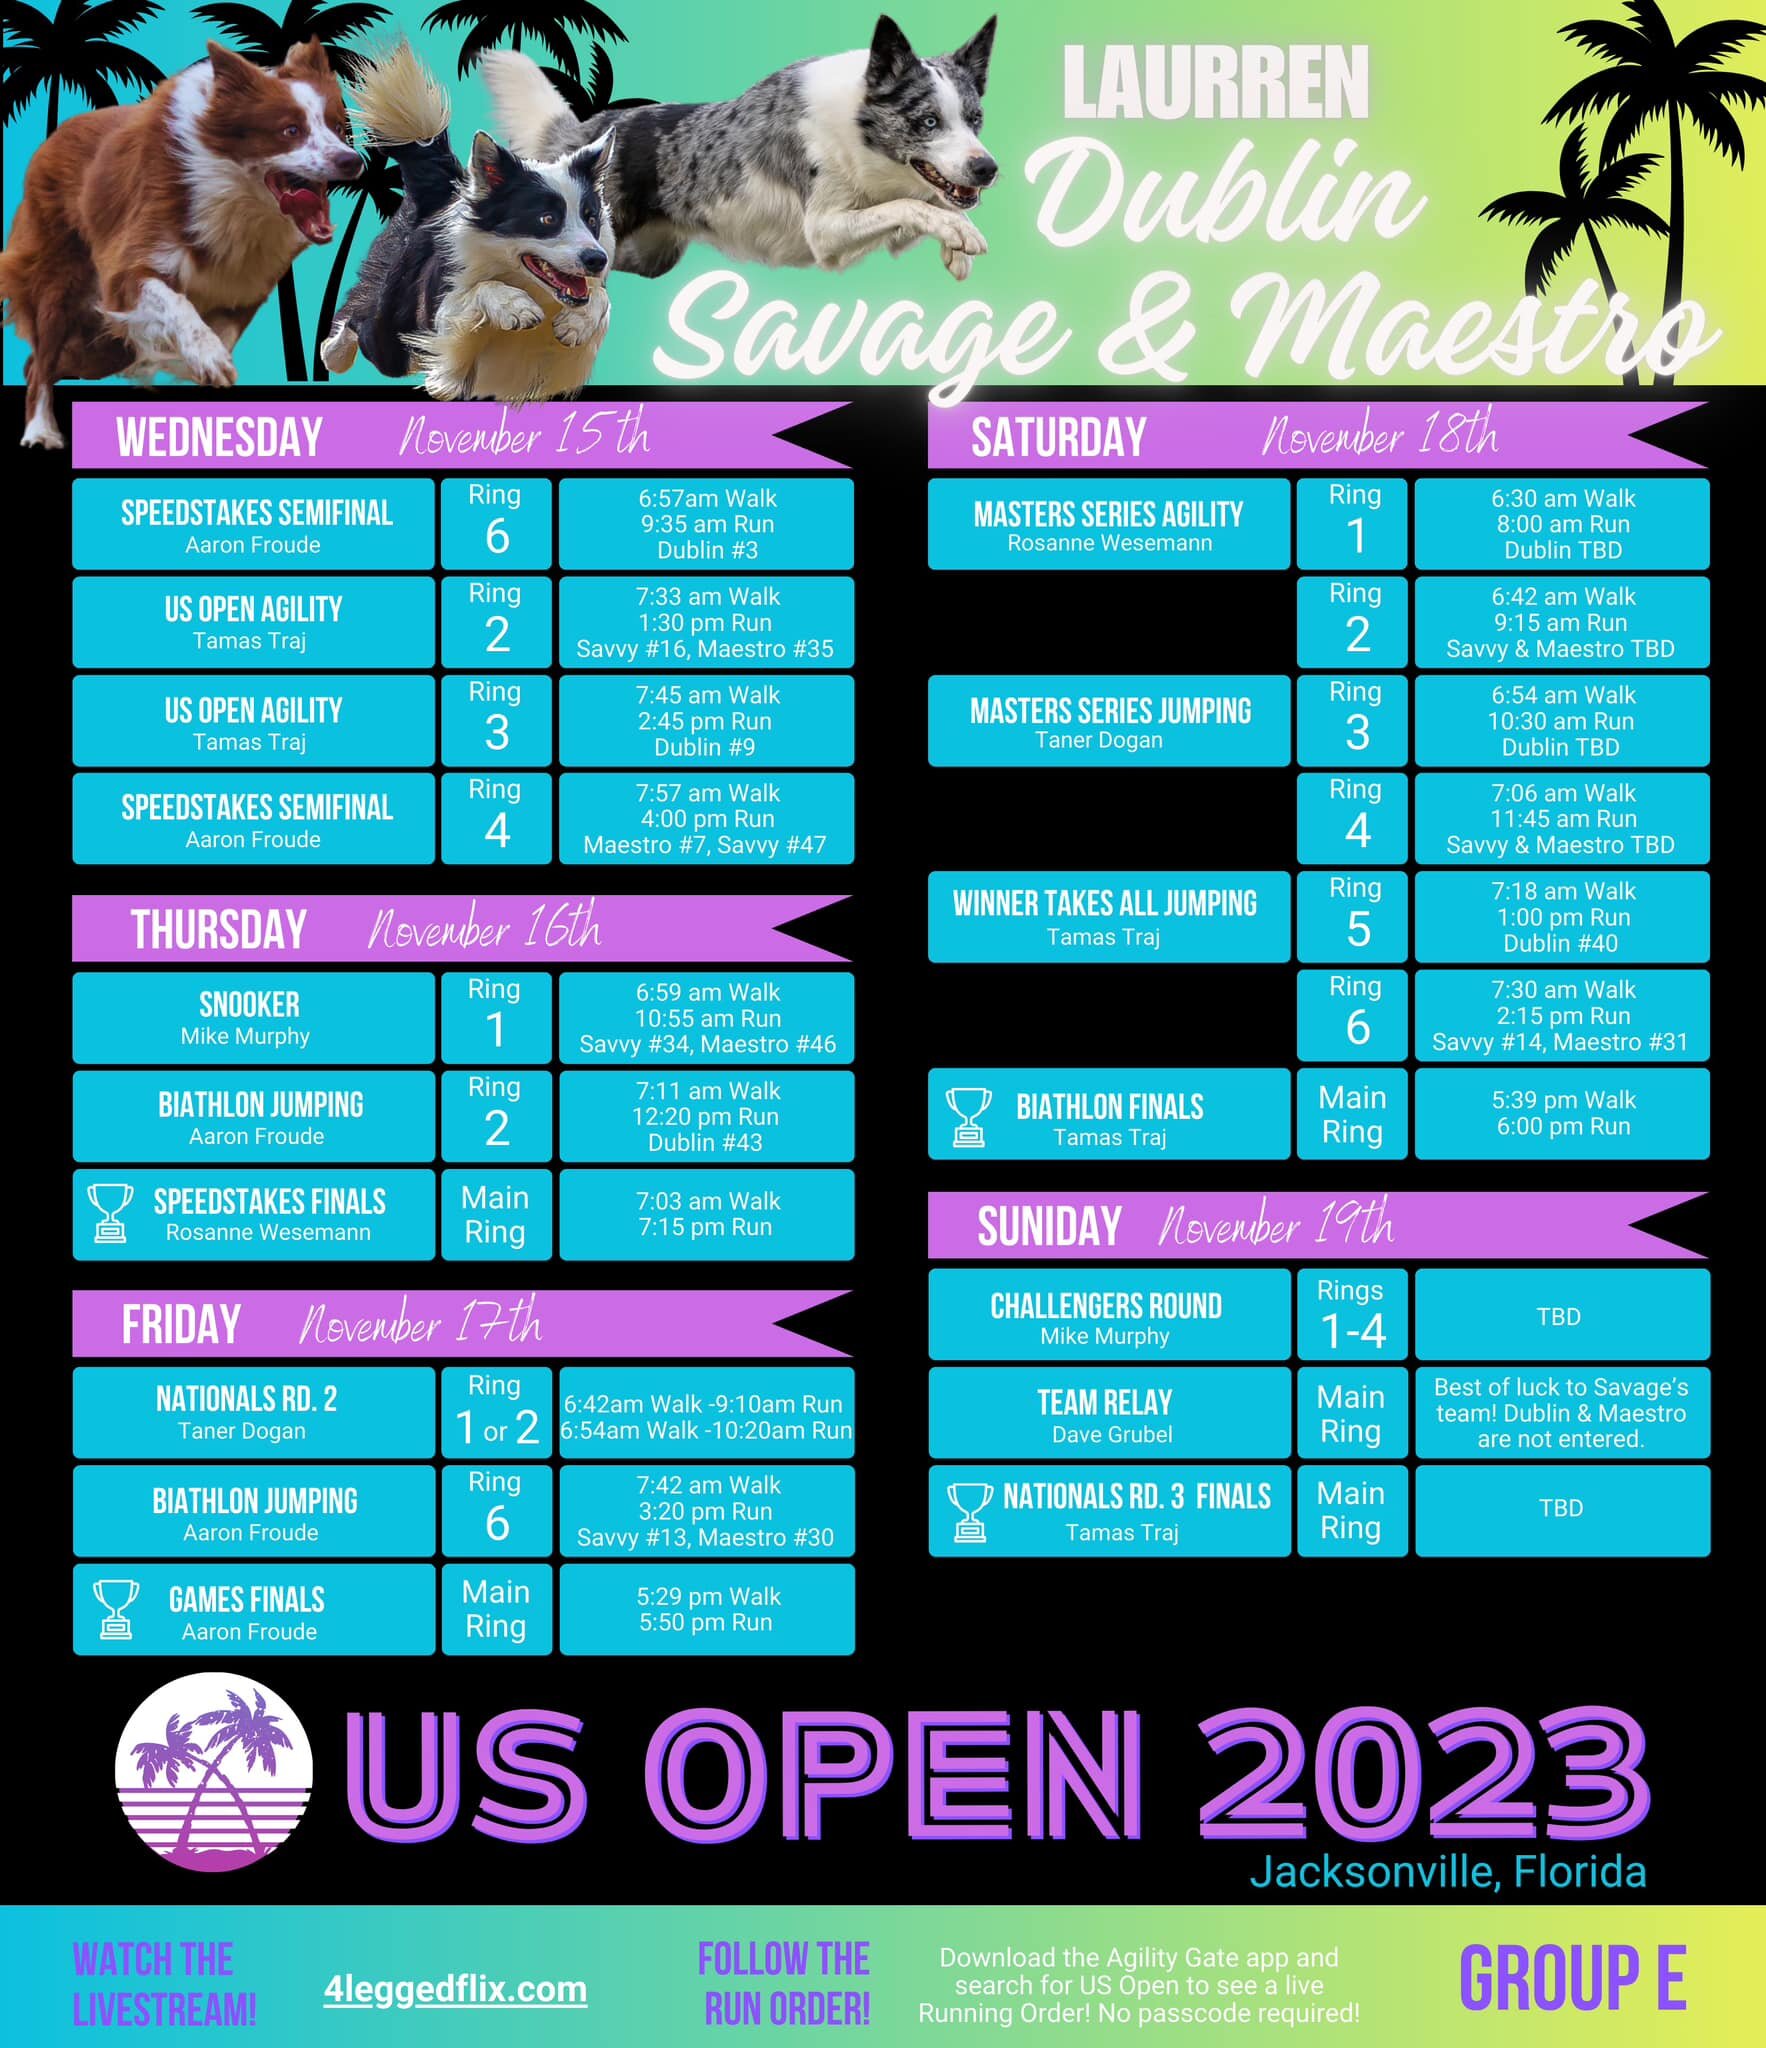 Here we go! 😬 Our 2023 US Open schedule! 

Super thanks again to auntie Jen for making this incredible little schedule for my boys so everyone can follow along! 
Super looking forward to our week in Florida! 🌴
Good luck to everyone &amp; see you al